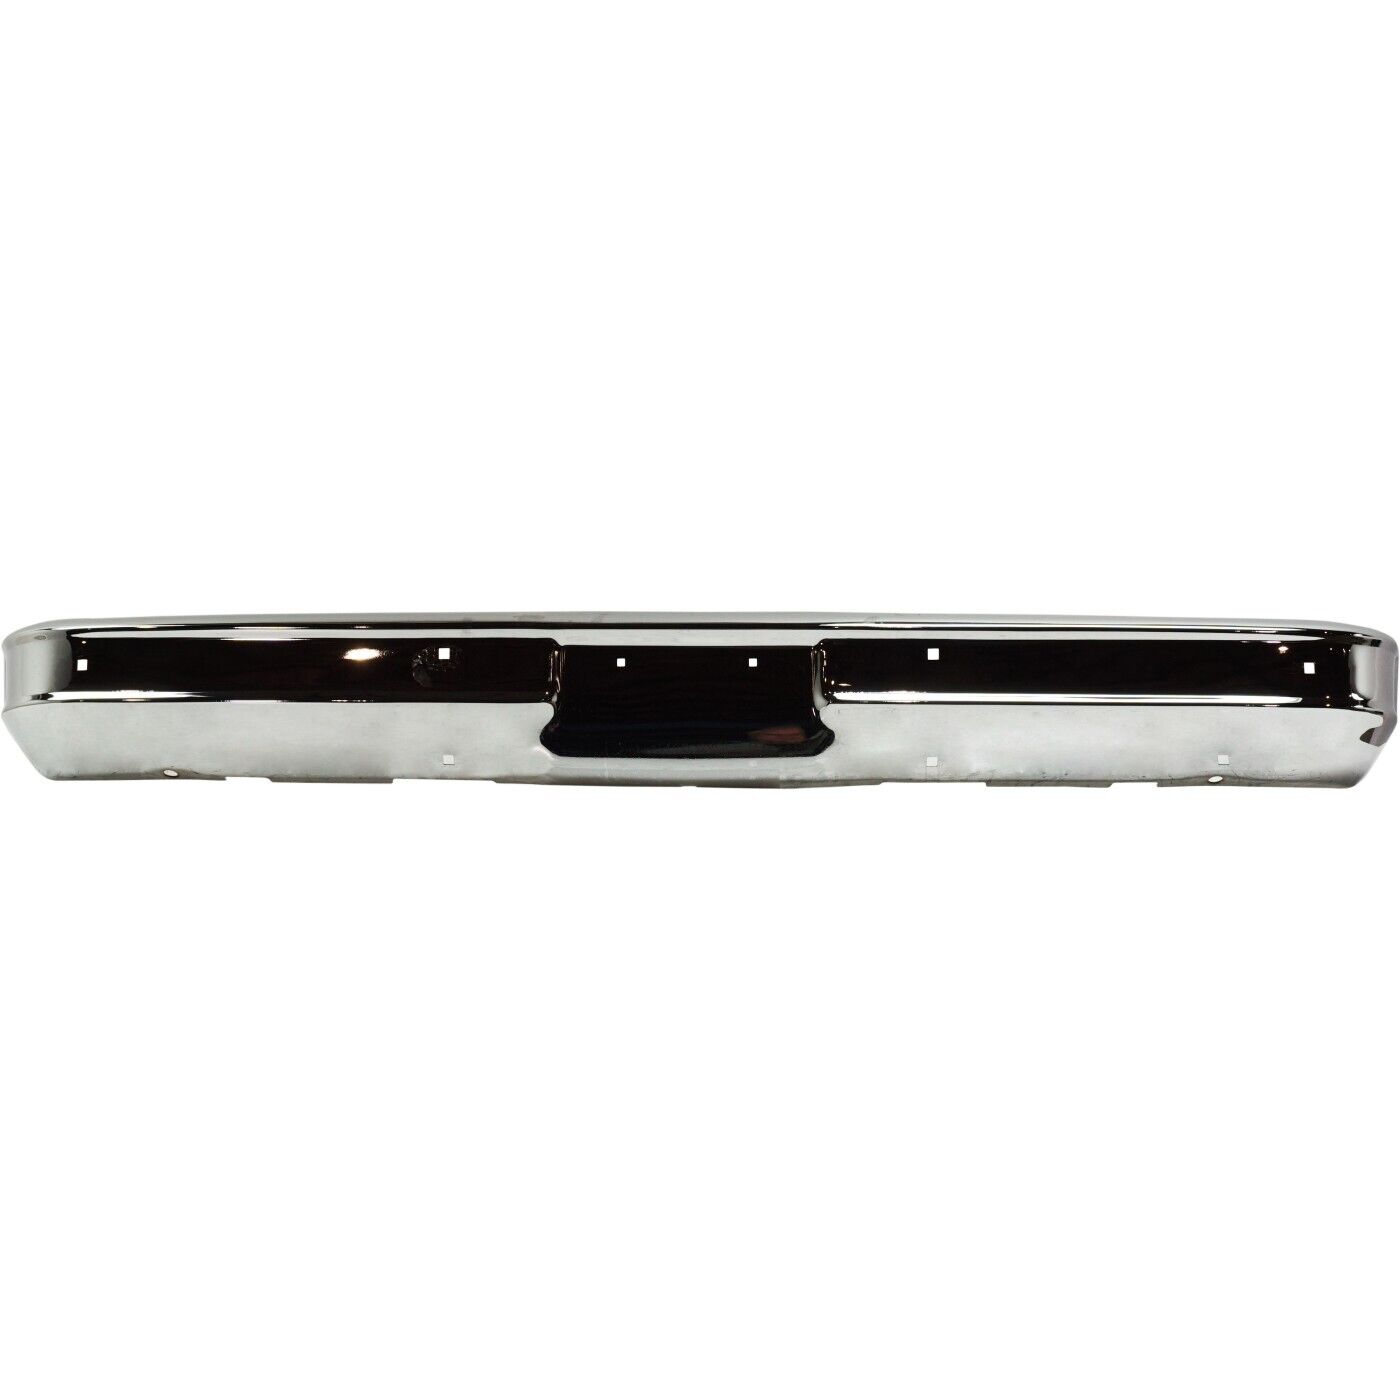 Front Bumper For 1975-1980 Chevrolet C10 and K10 Steel Chrome